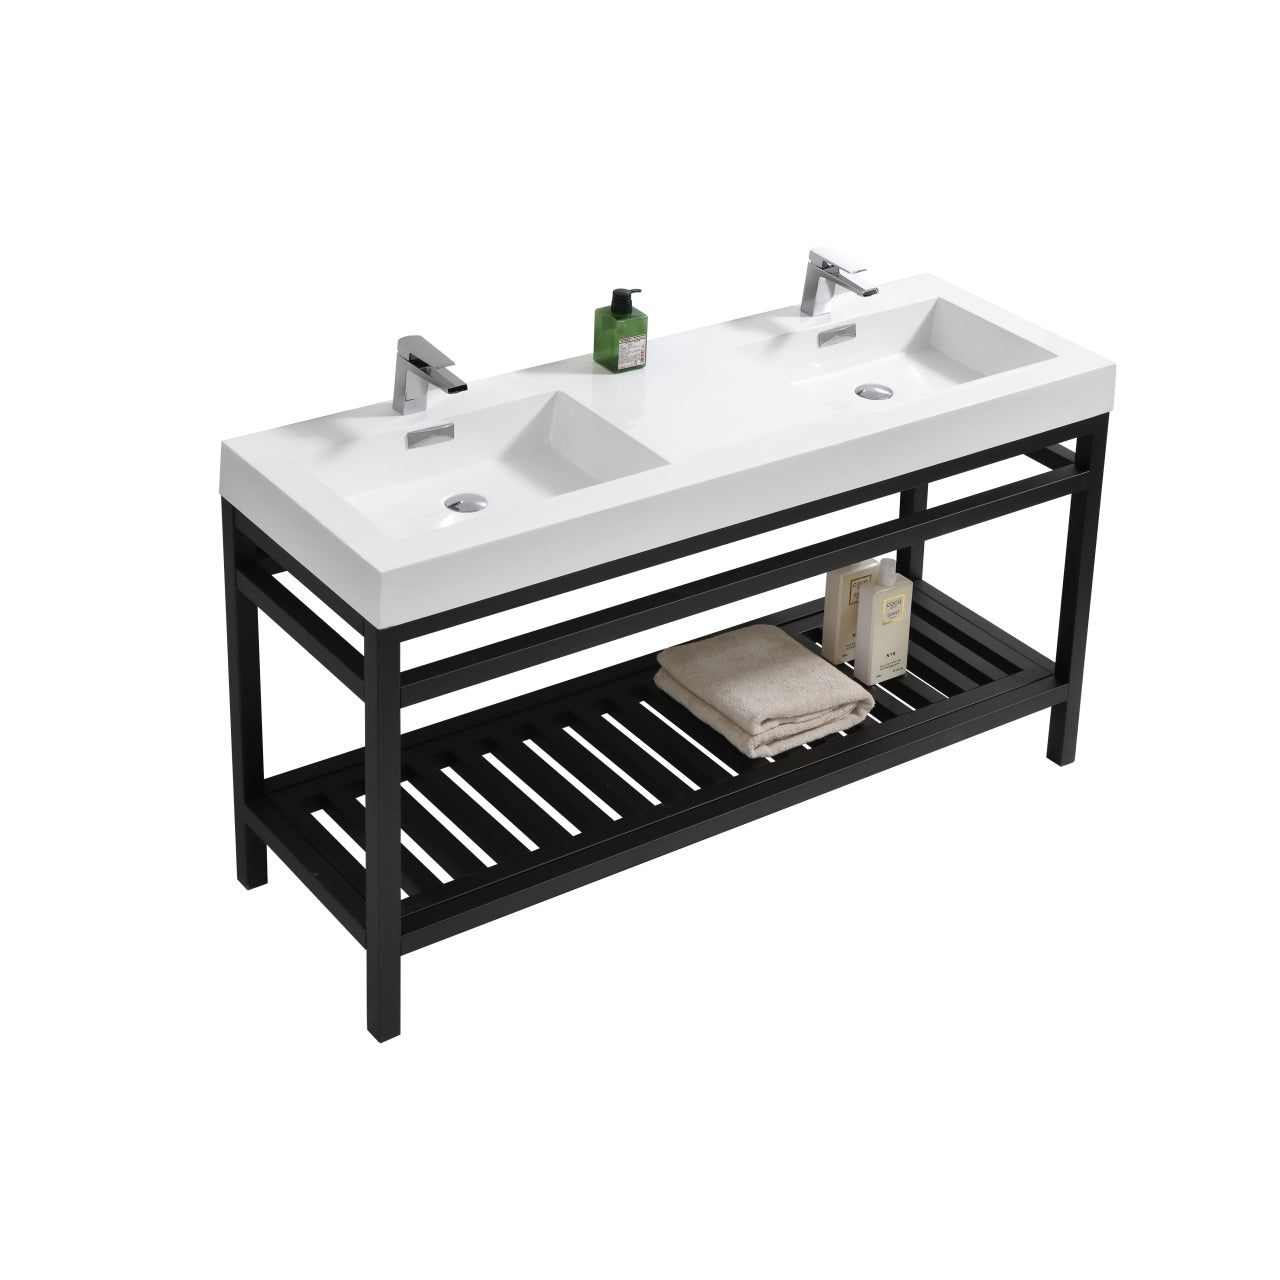 Cisco 60′′ Inch Double Sink Stainless Steel Console W/ White Acrylic Sink – Matte Black